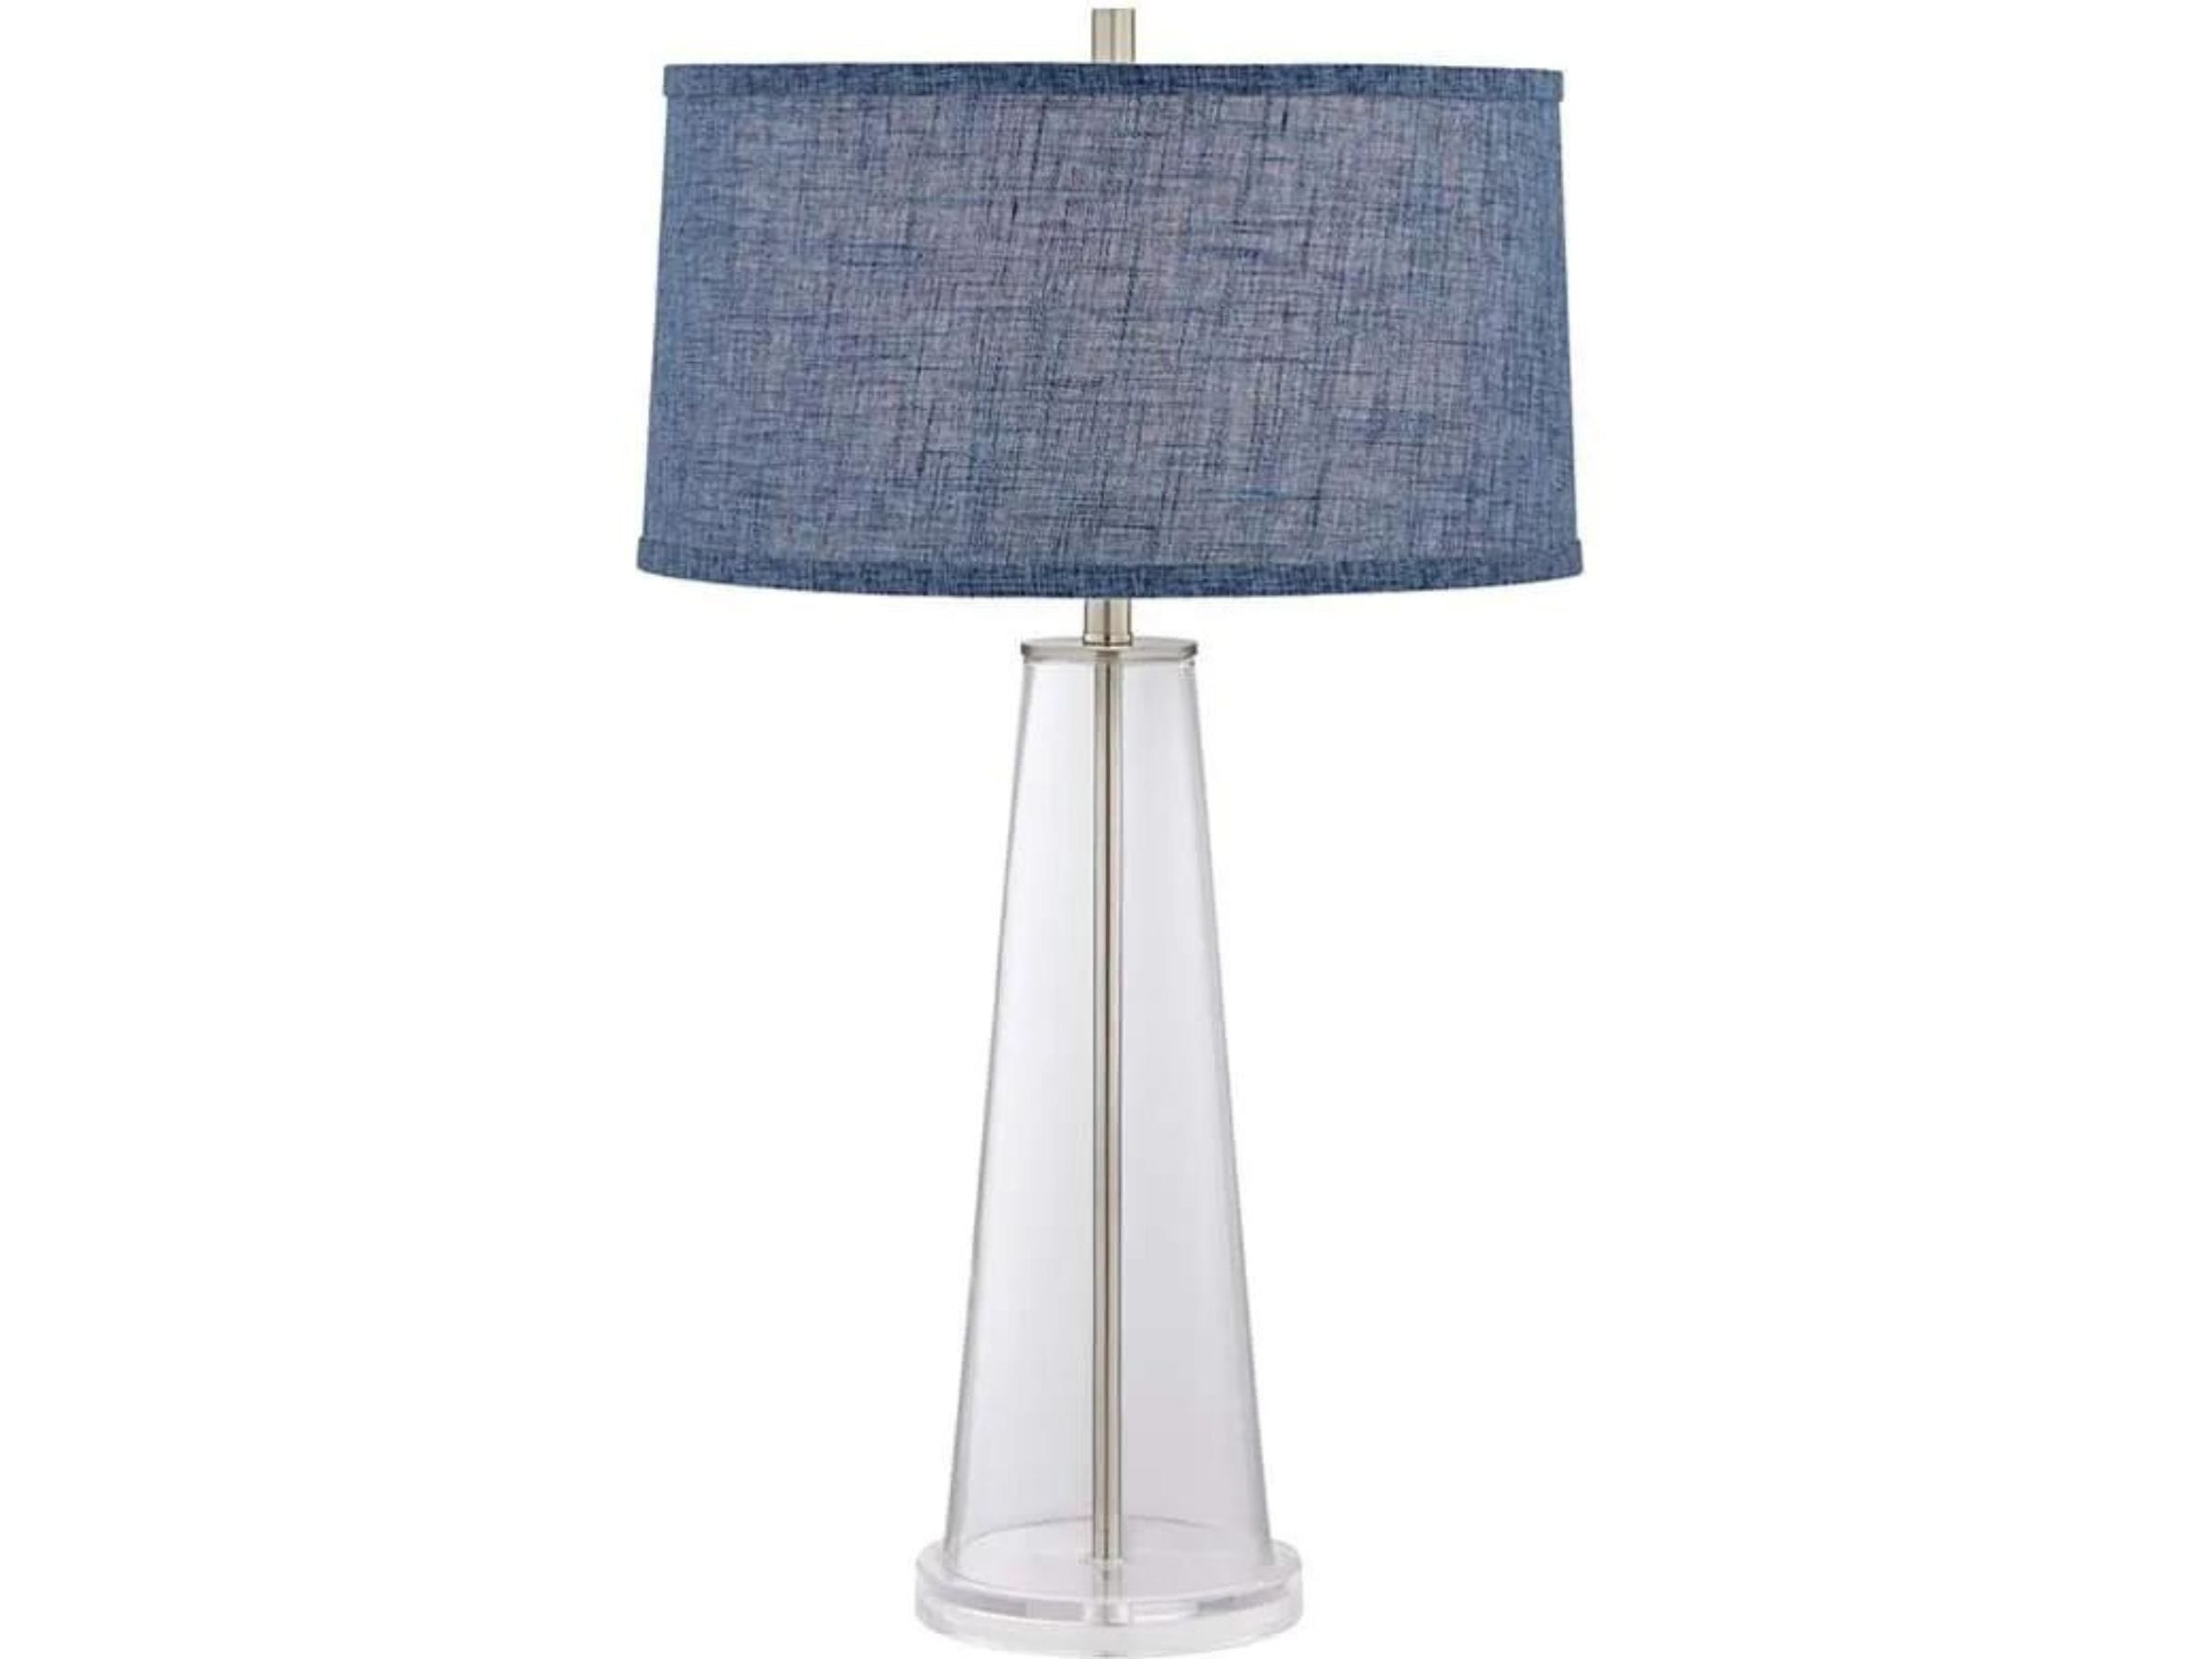 Glass Cone with Denim Shade Table Lamp 29.5"H